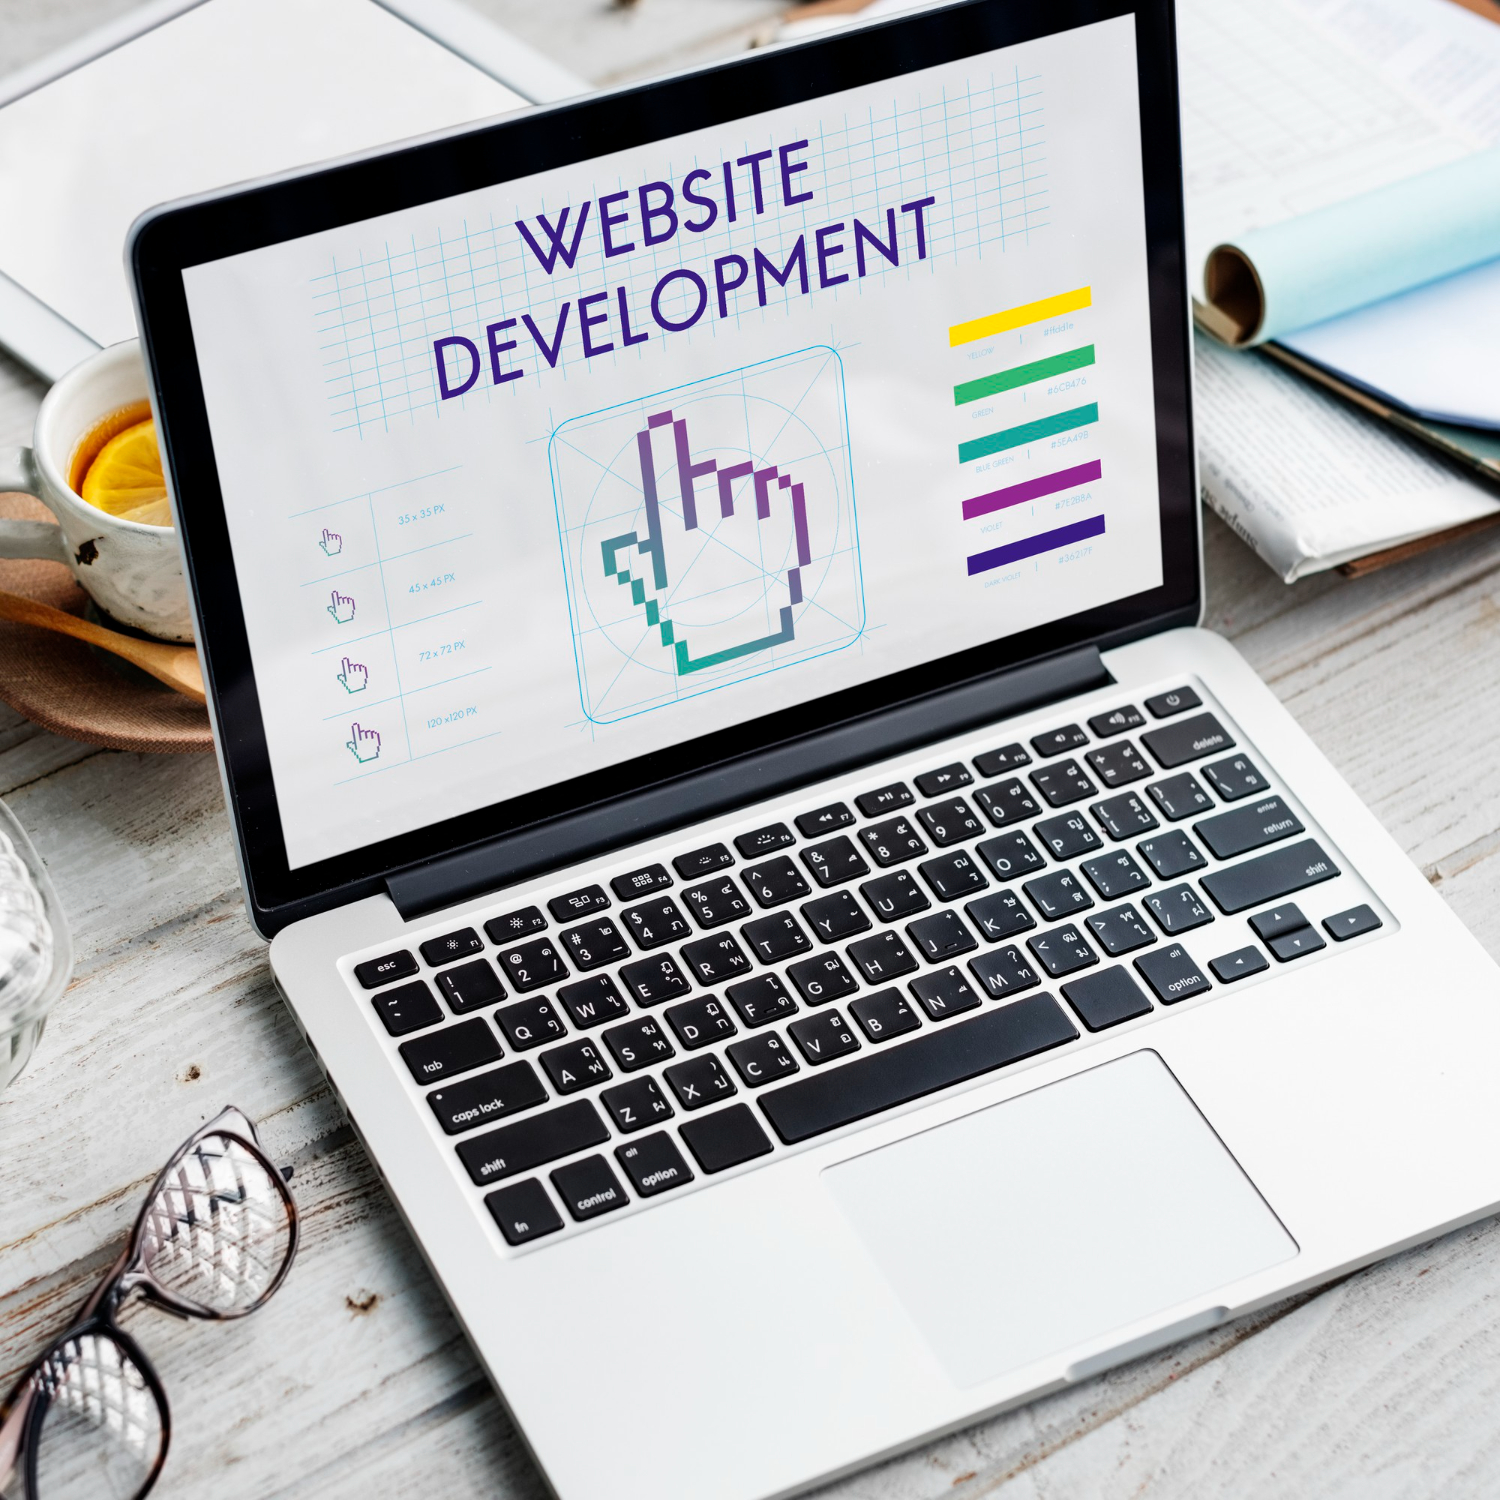 IM Solutions is the best website design & development company in Bangalore, India. We provide professional web designing services to turn your imagination into reality.